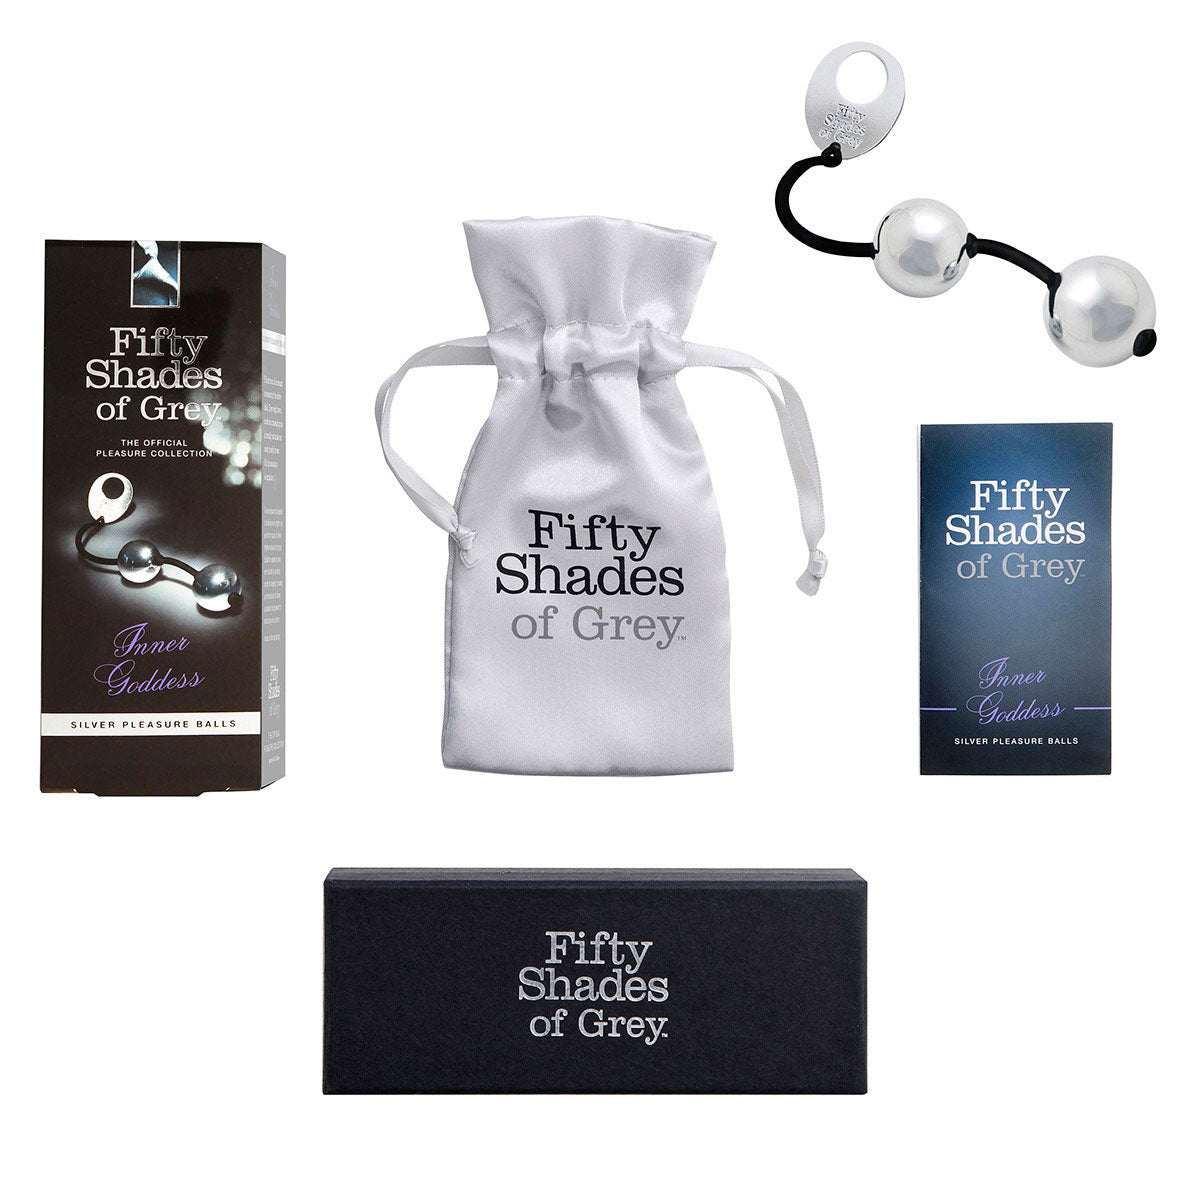 Fifty Shades - Inner Goddess Silver Metal Pleasure Balls Intimates Adult Boutique